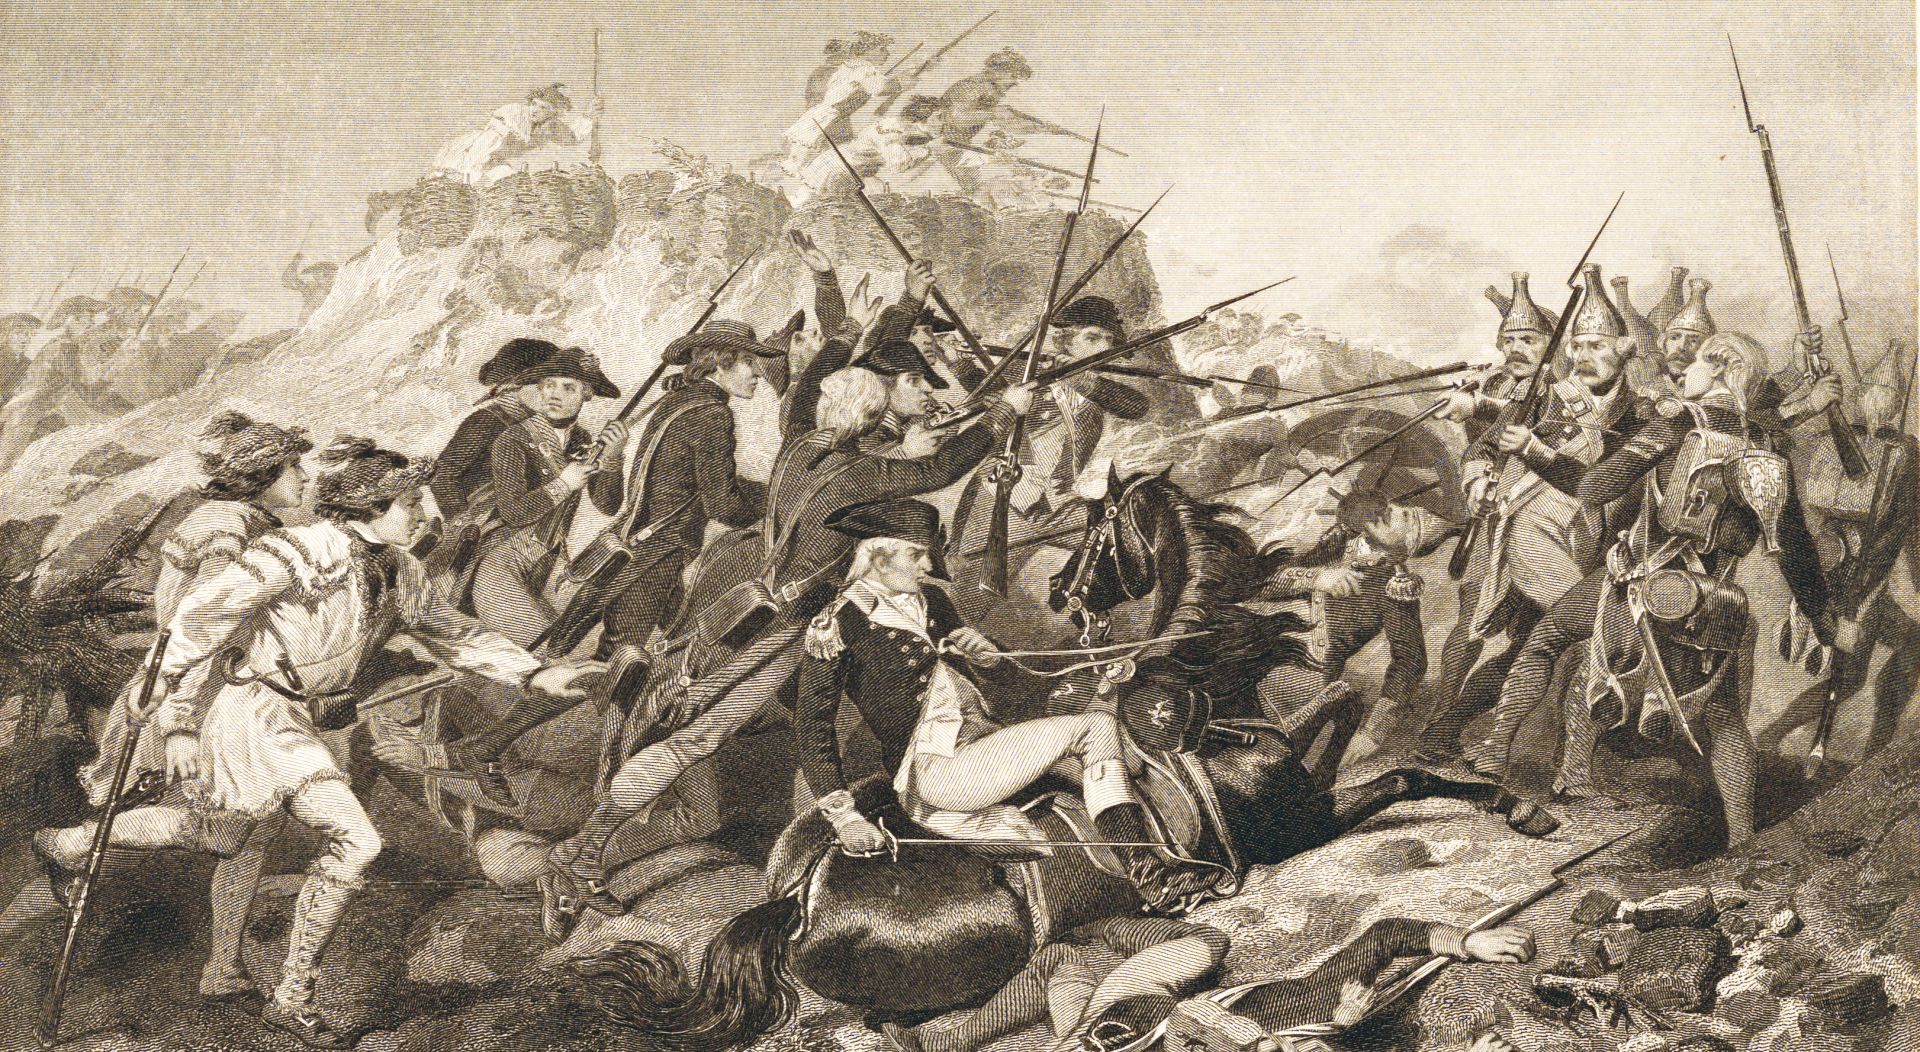 A ferocious counterattack by the Marblehead men under the command of Gen. Benedict Arnold led to victory at Saratoga, the turning point and most important American win in the war. New York Public Library